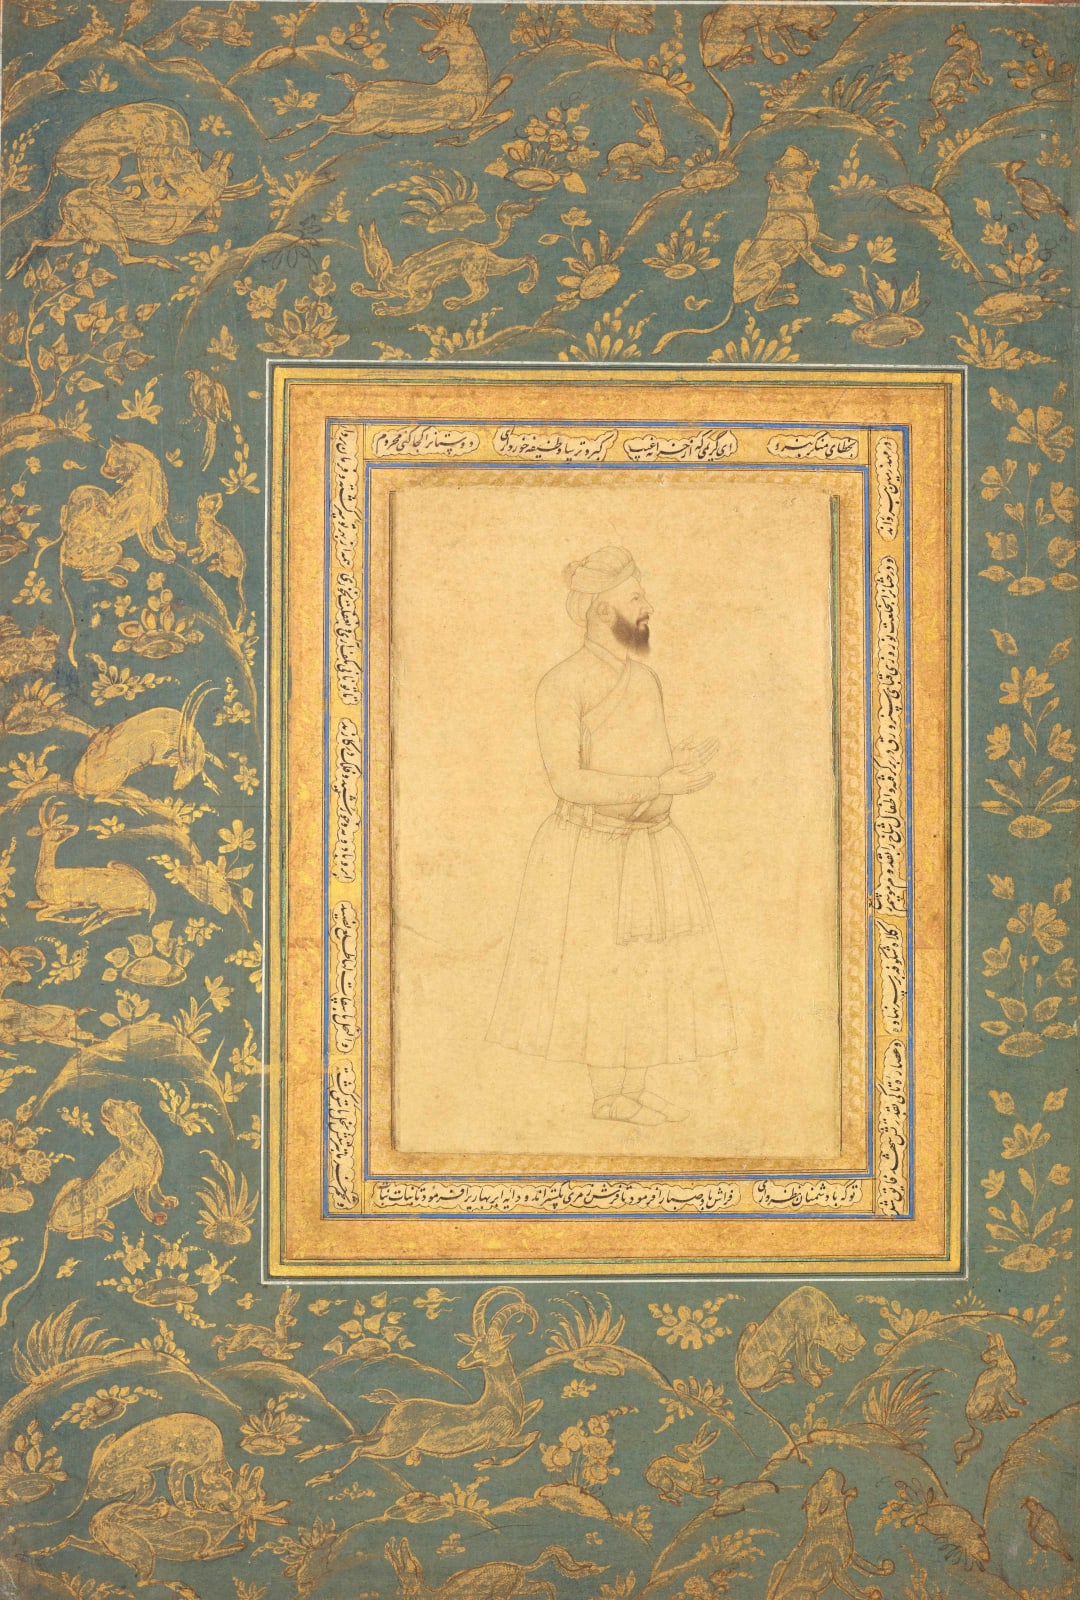 A Mughal Courtier, Imperial Mughal, c. 1660